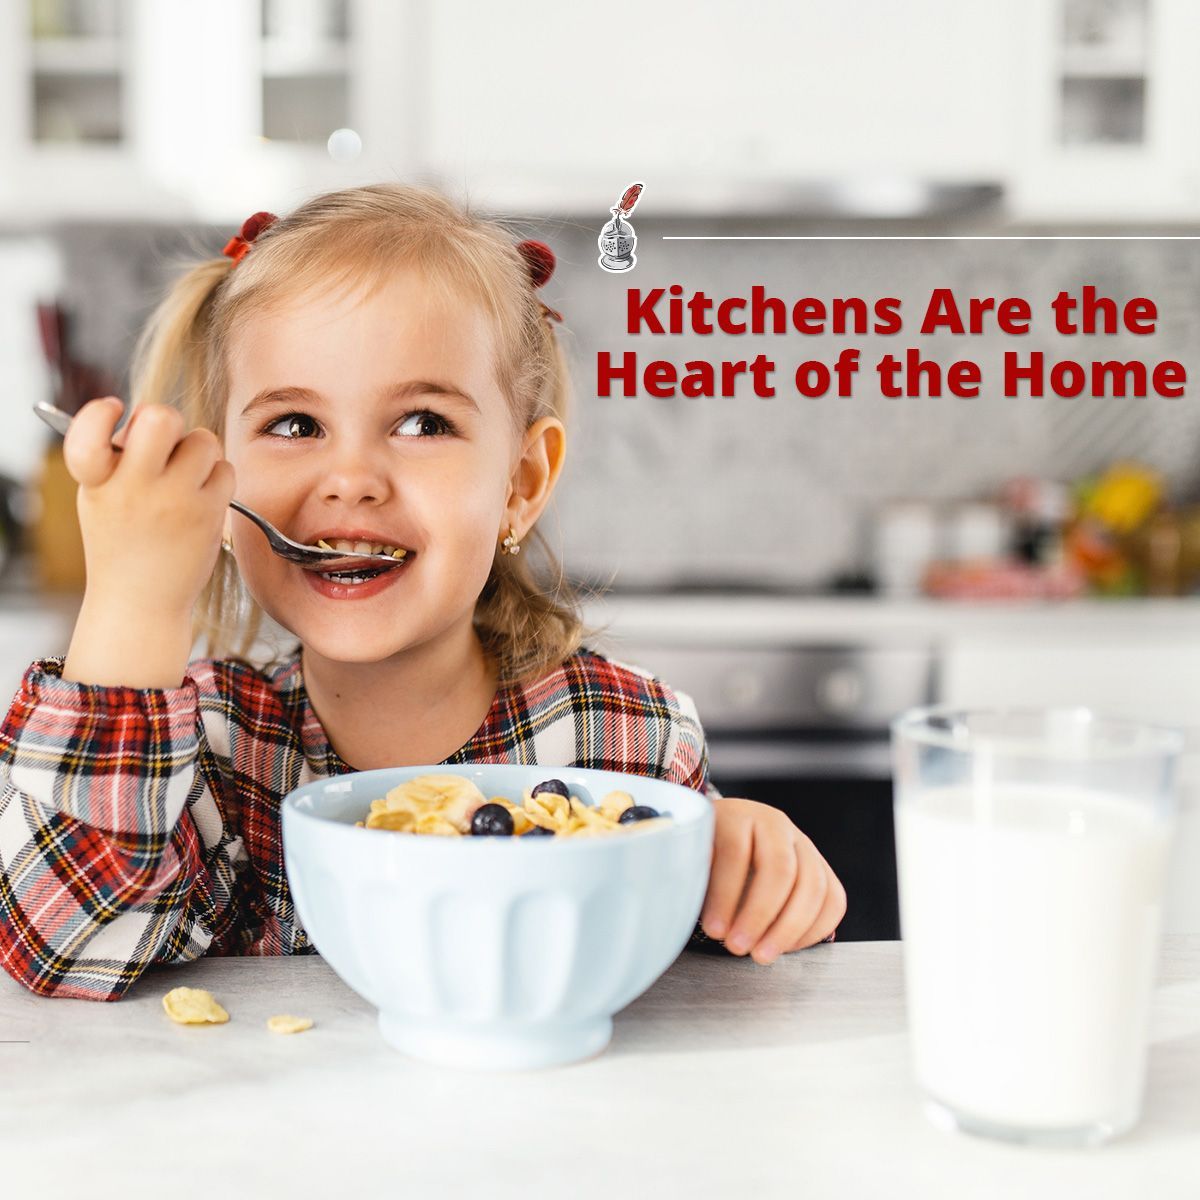 Kitchens Are the Heart of the Home